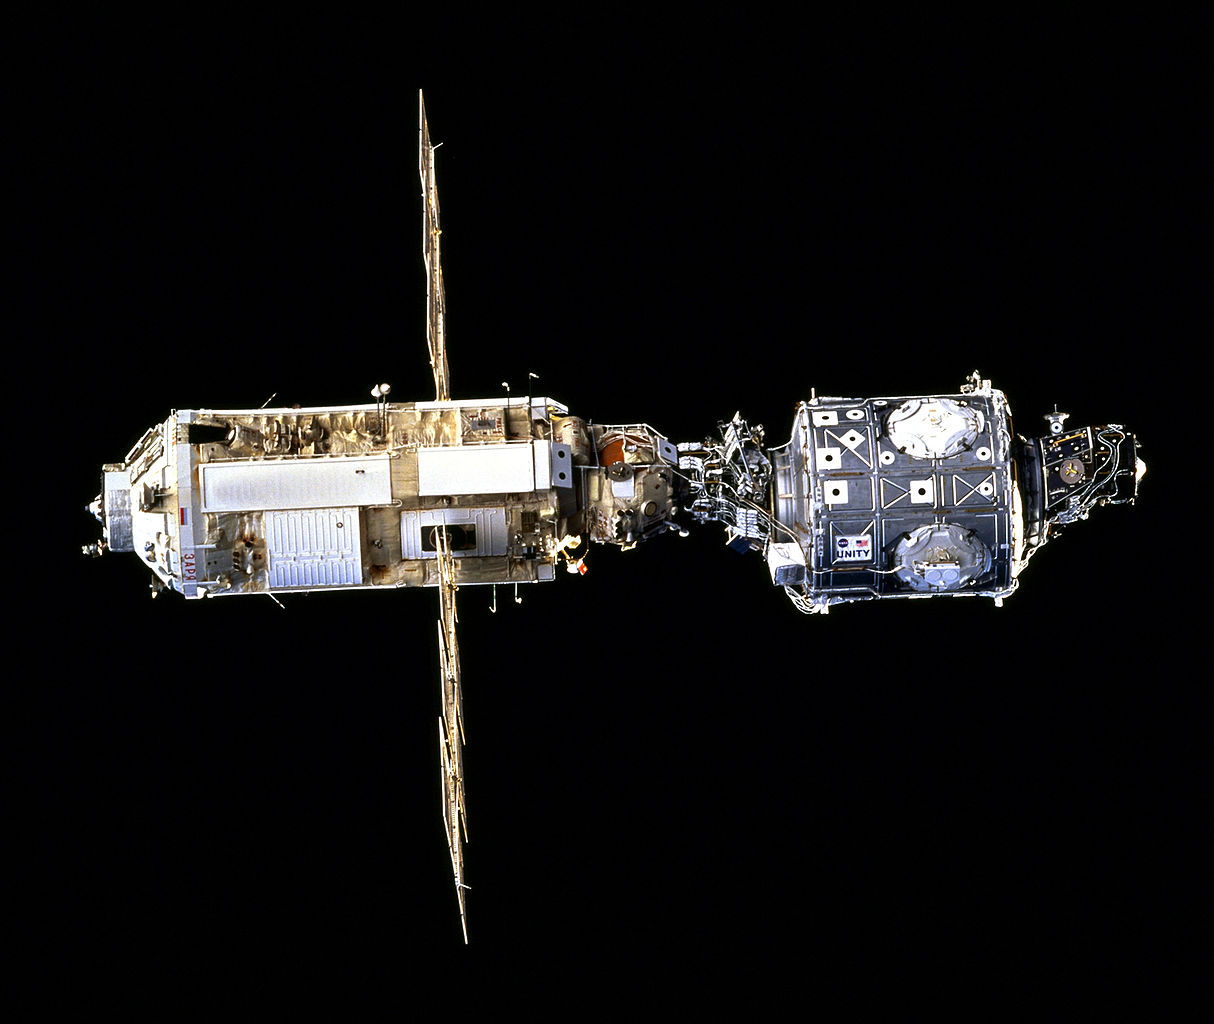 U.S.-built Unity module (right) attached to Russian-built Zarya module, forming the basic components of the International Space Station (ISS), photographed in Earth orbit, 15 December 1998. (National Aeronautics and Space Administration STS088-703-019)